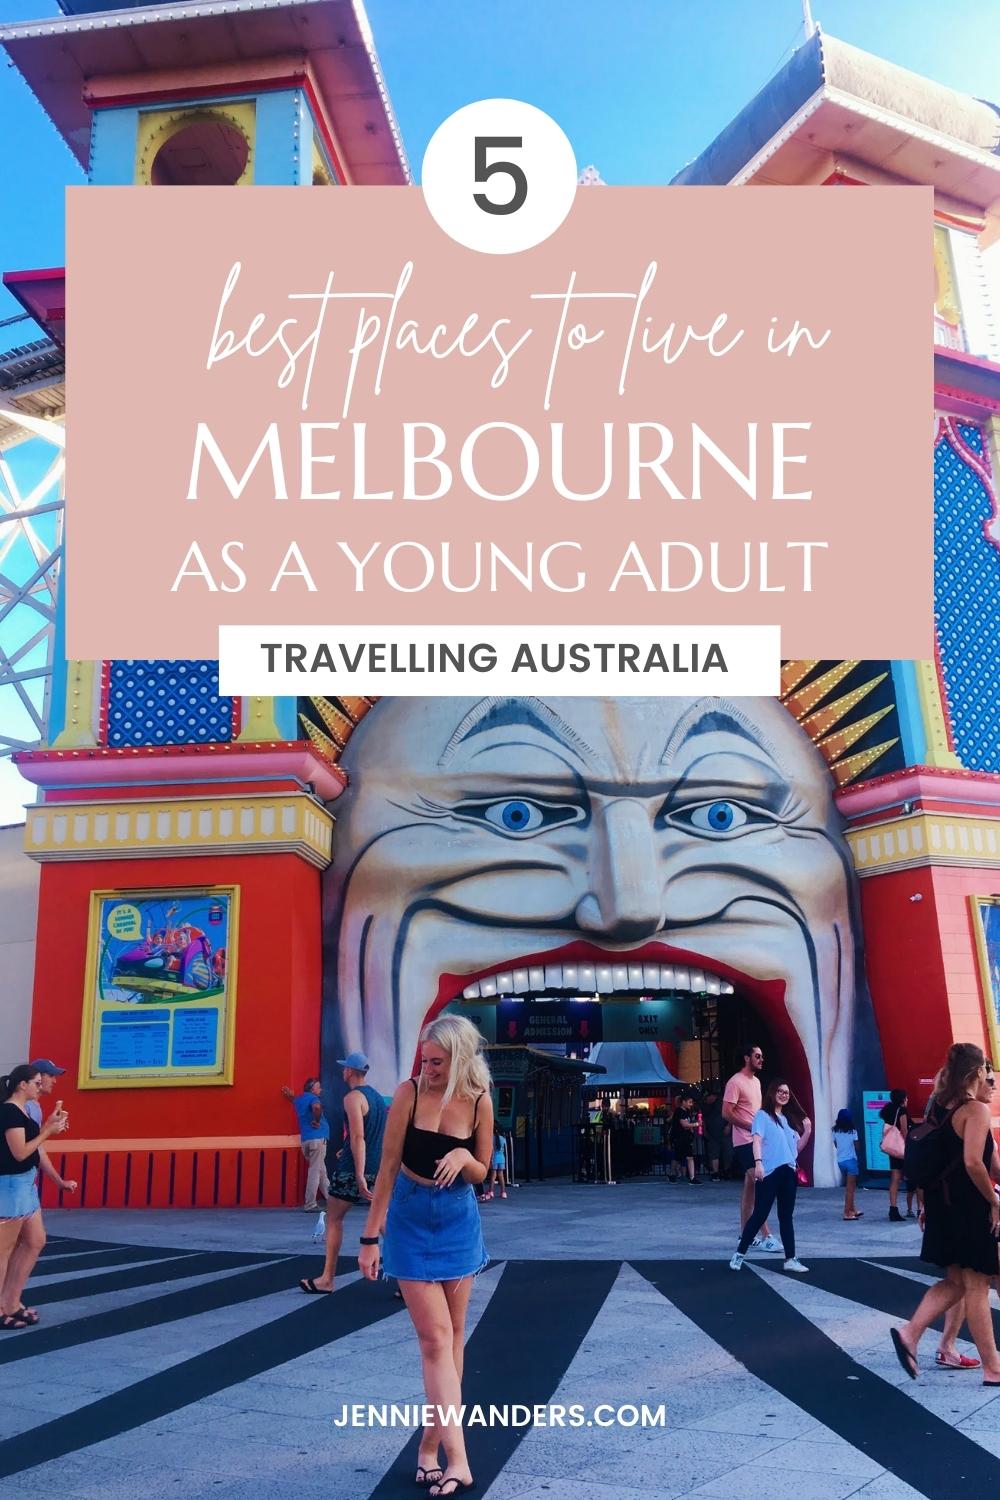 best places to live in Melbourne pinterest pin